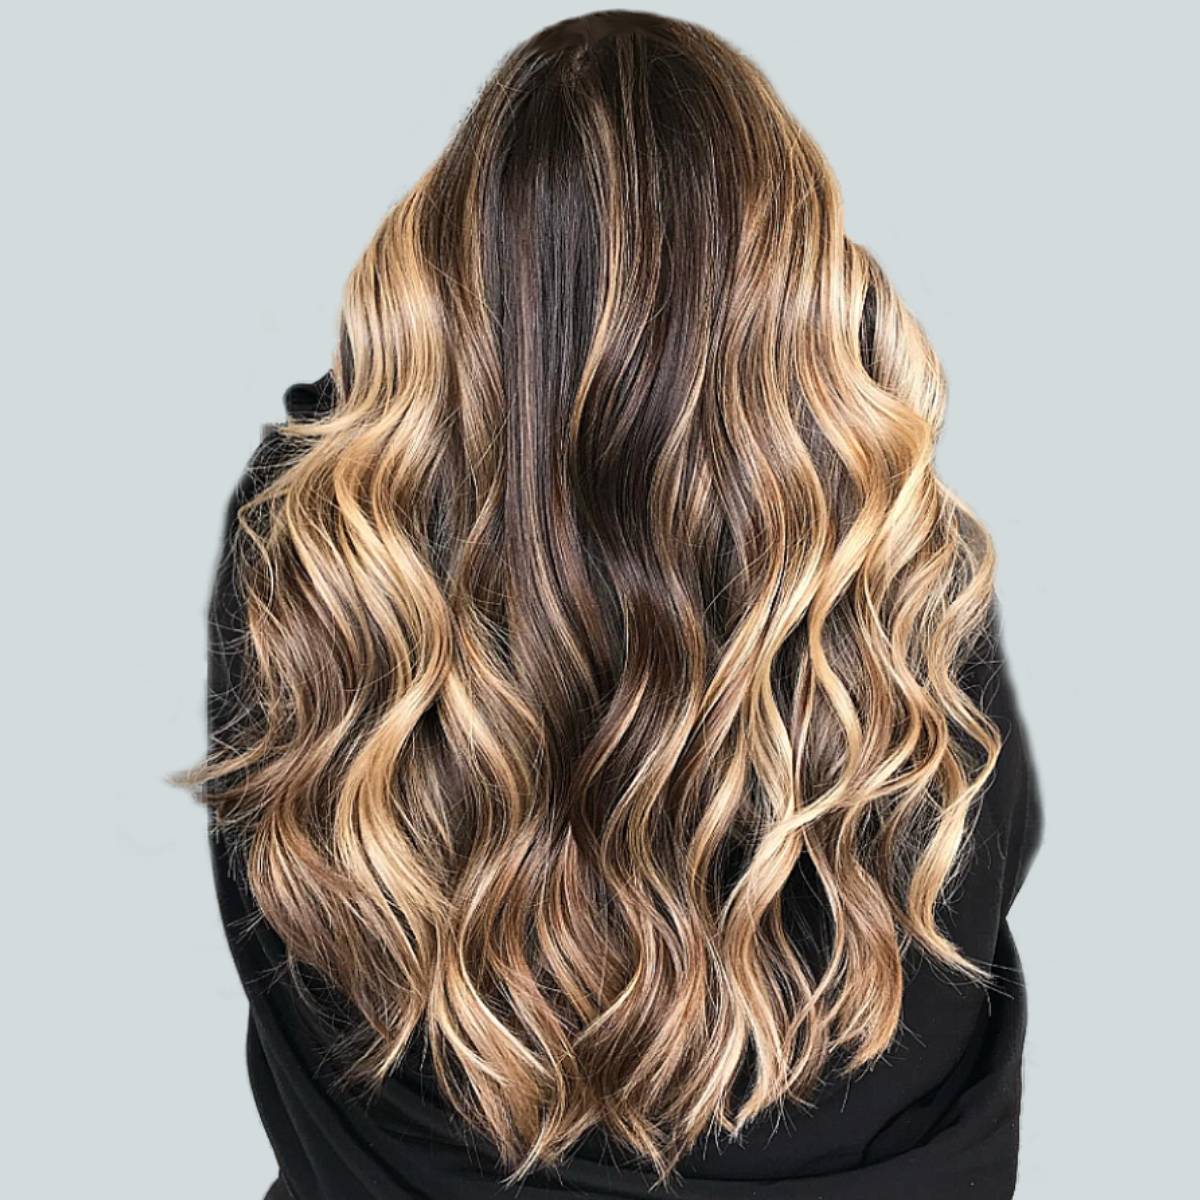 https://content.latest-hairstyles.com/wp-content/uploads/blonde-balayage-on-dark-brown-hair-1x1-1.jpg